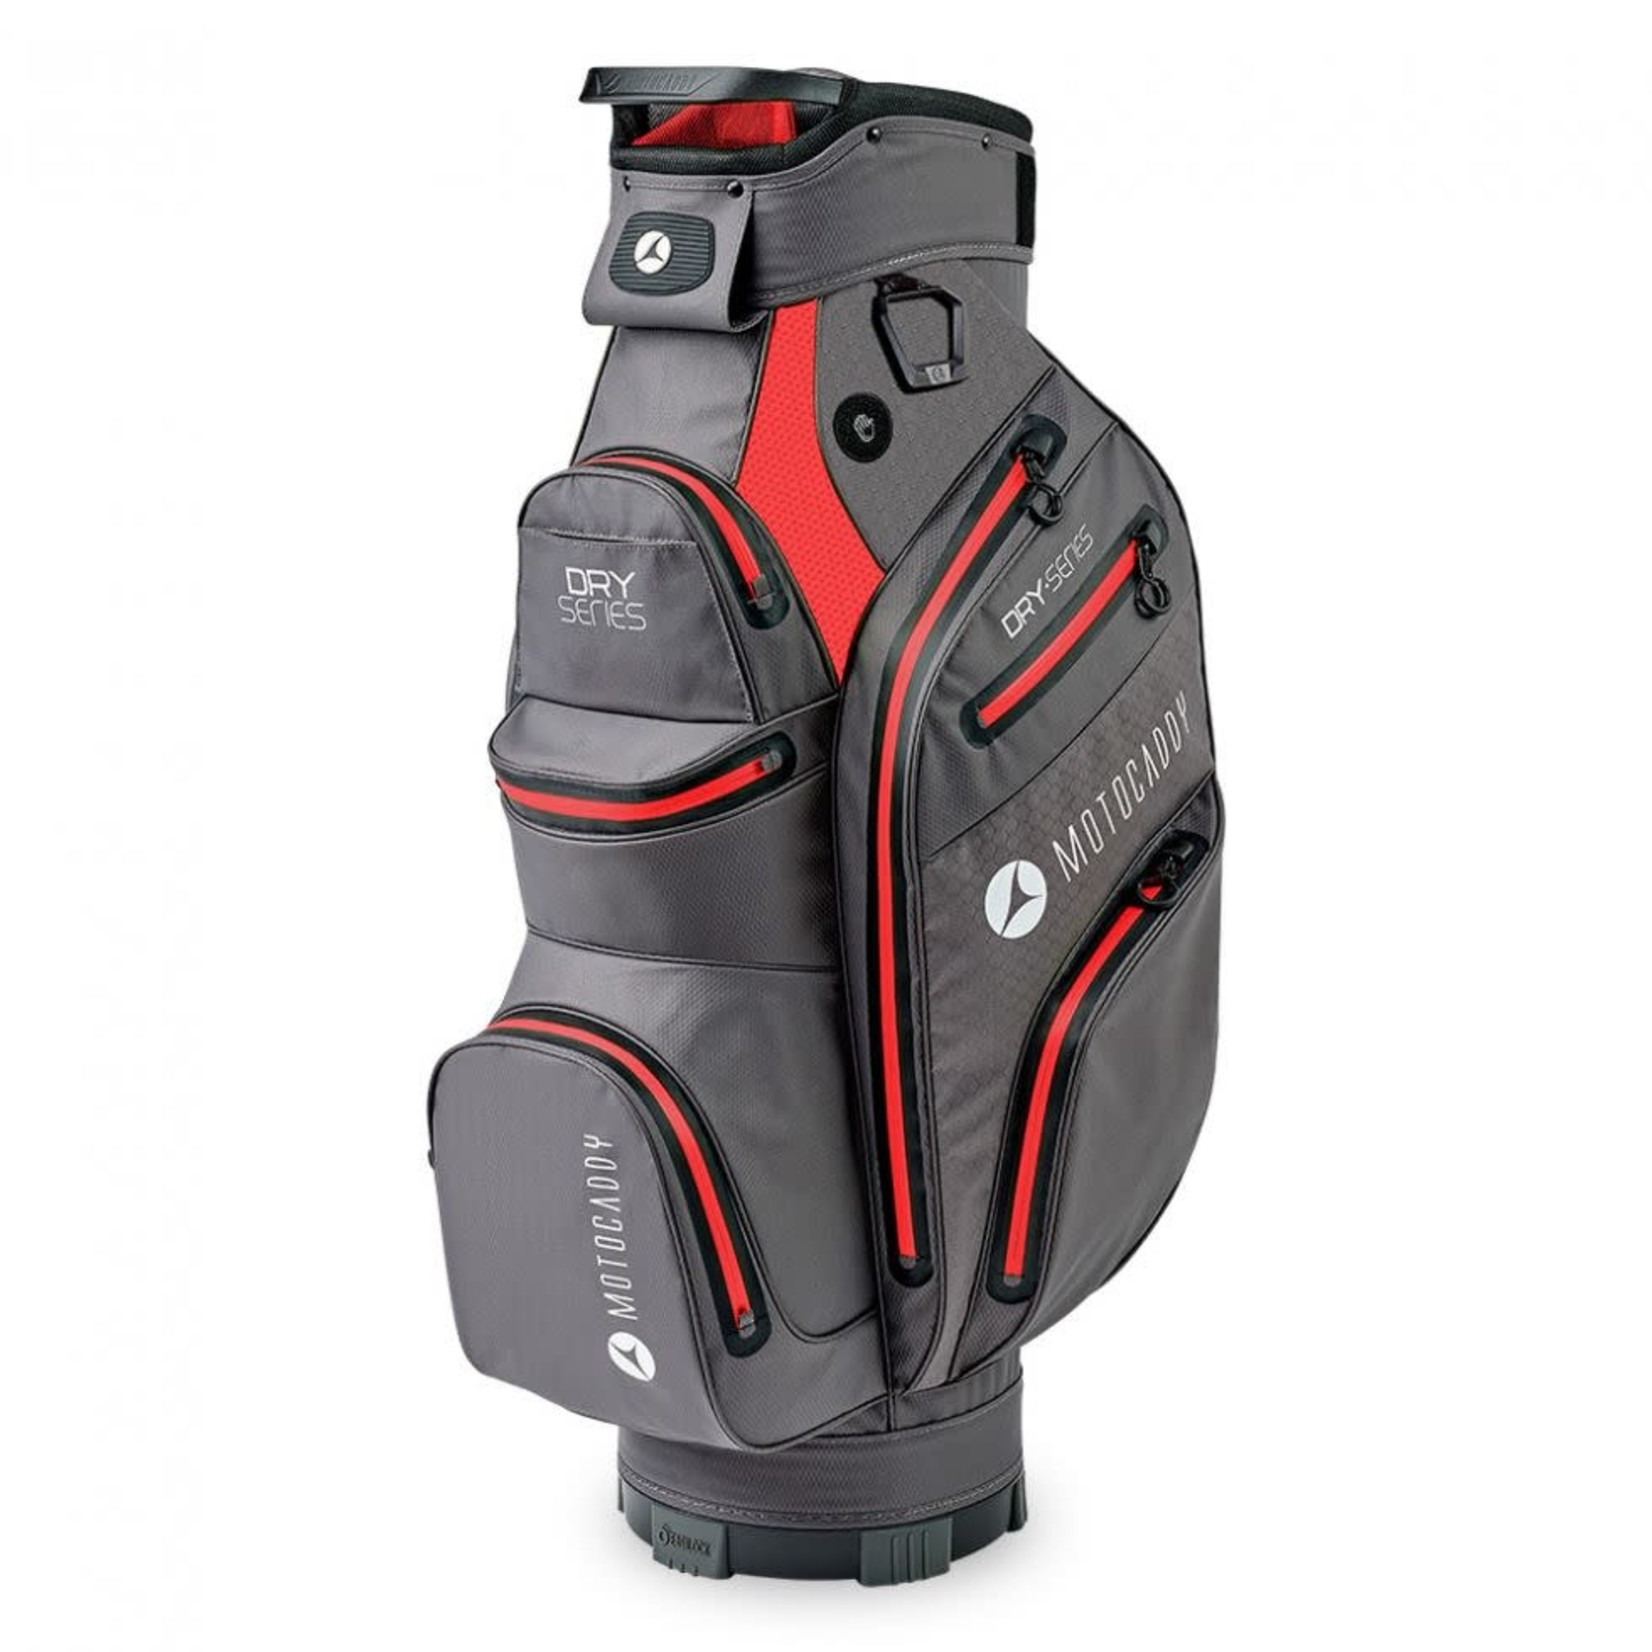 Motocaddy Motocaddy DRY Series Cartbag - Charcoal/Red